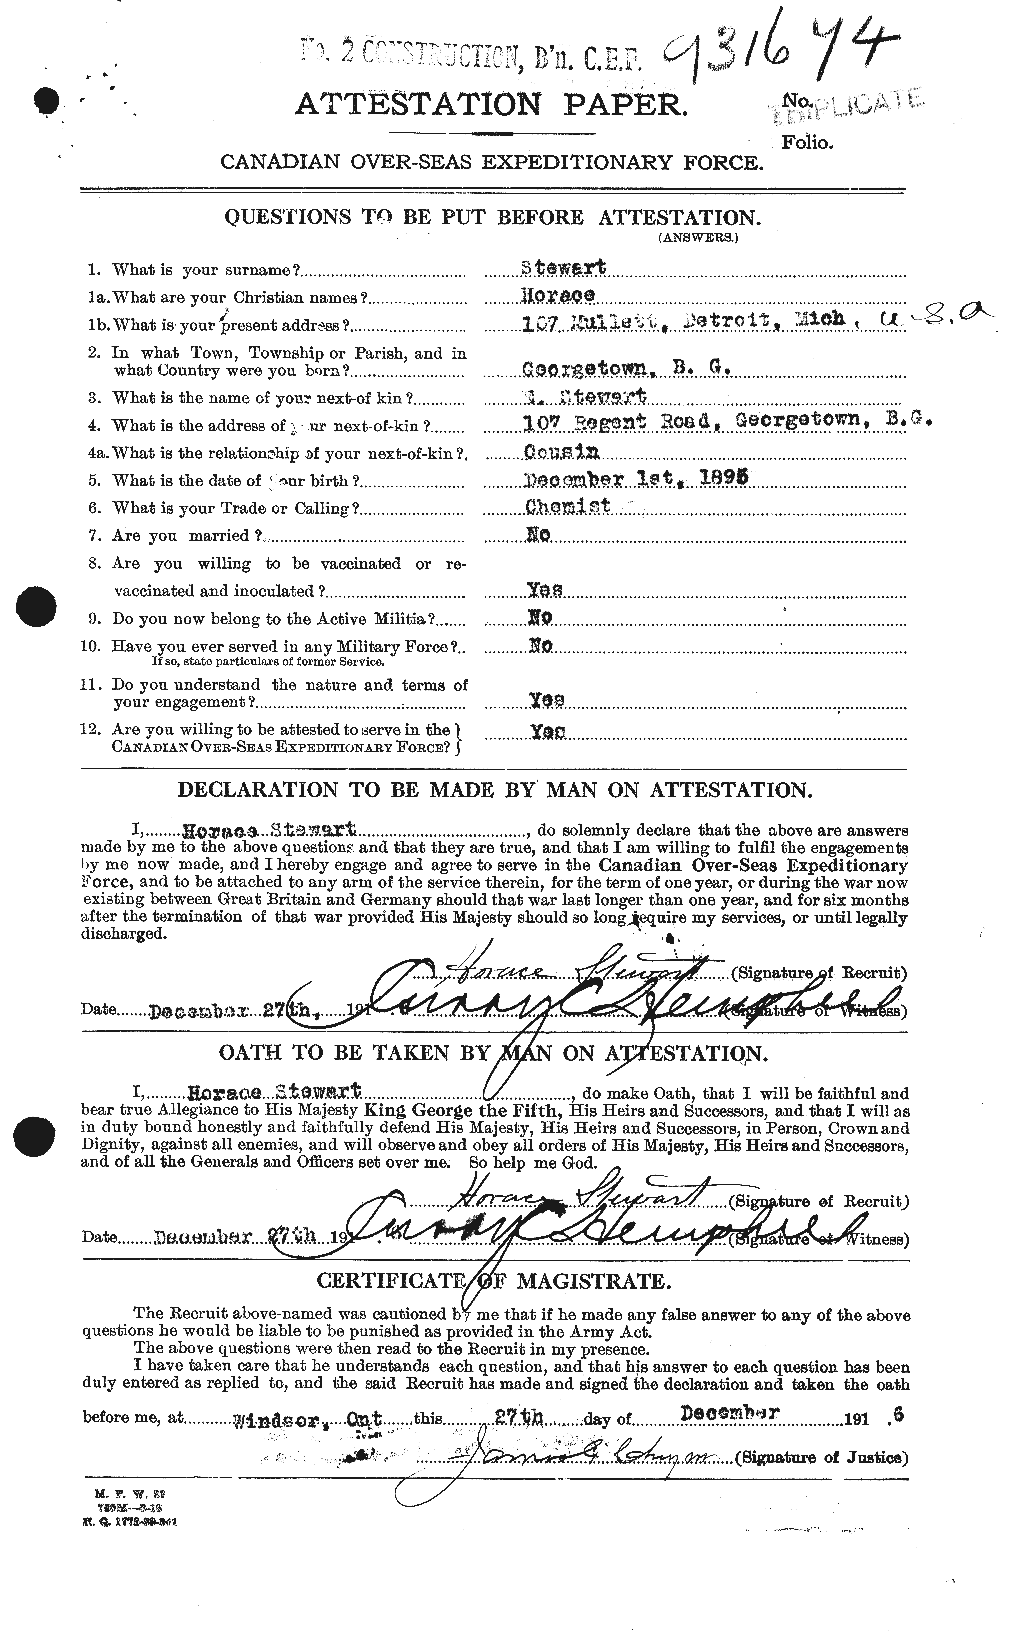 Personnel Records of the First World War - CEF 623345a